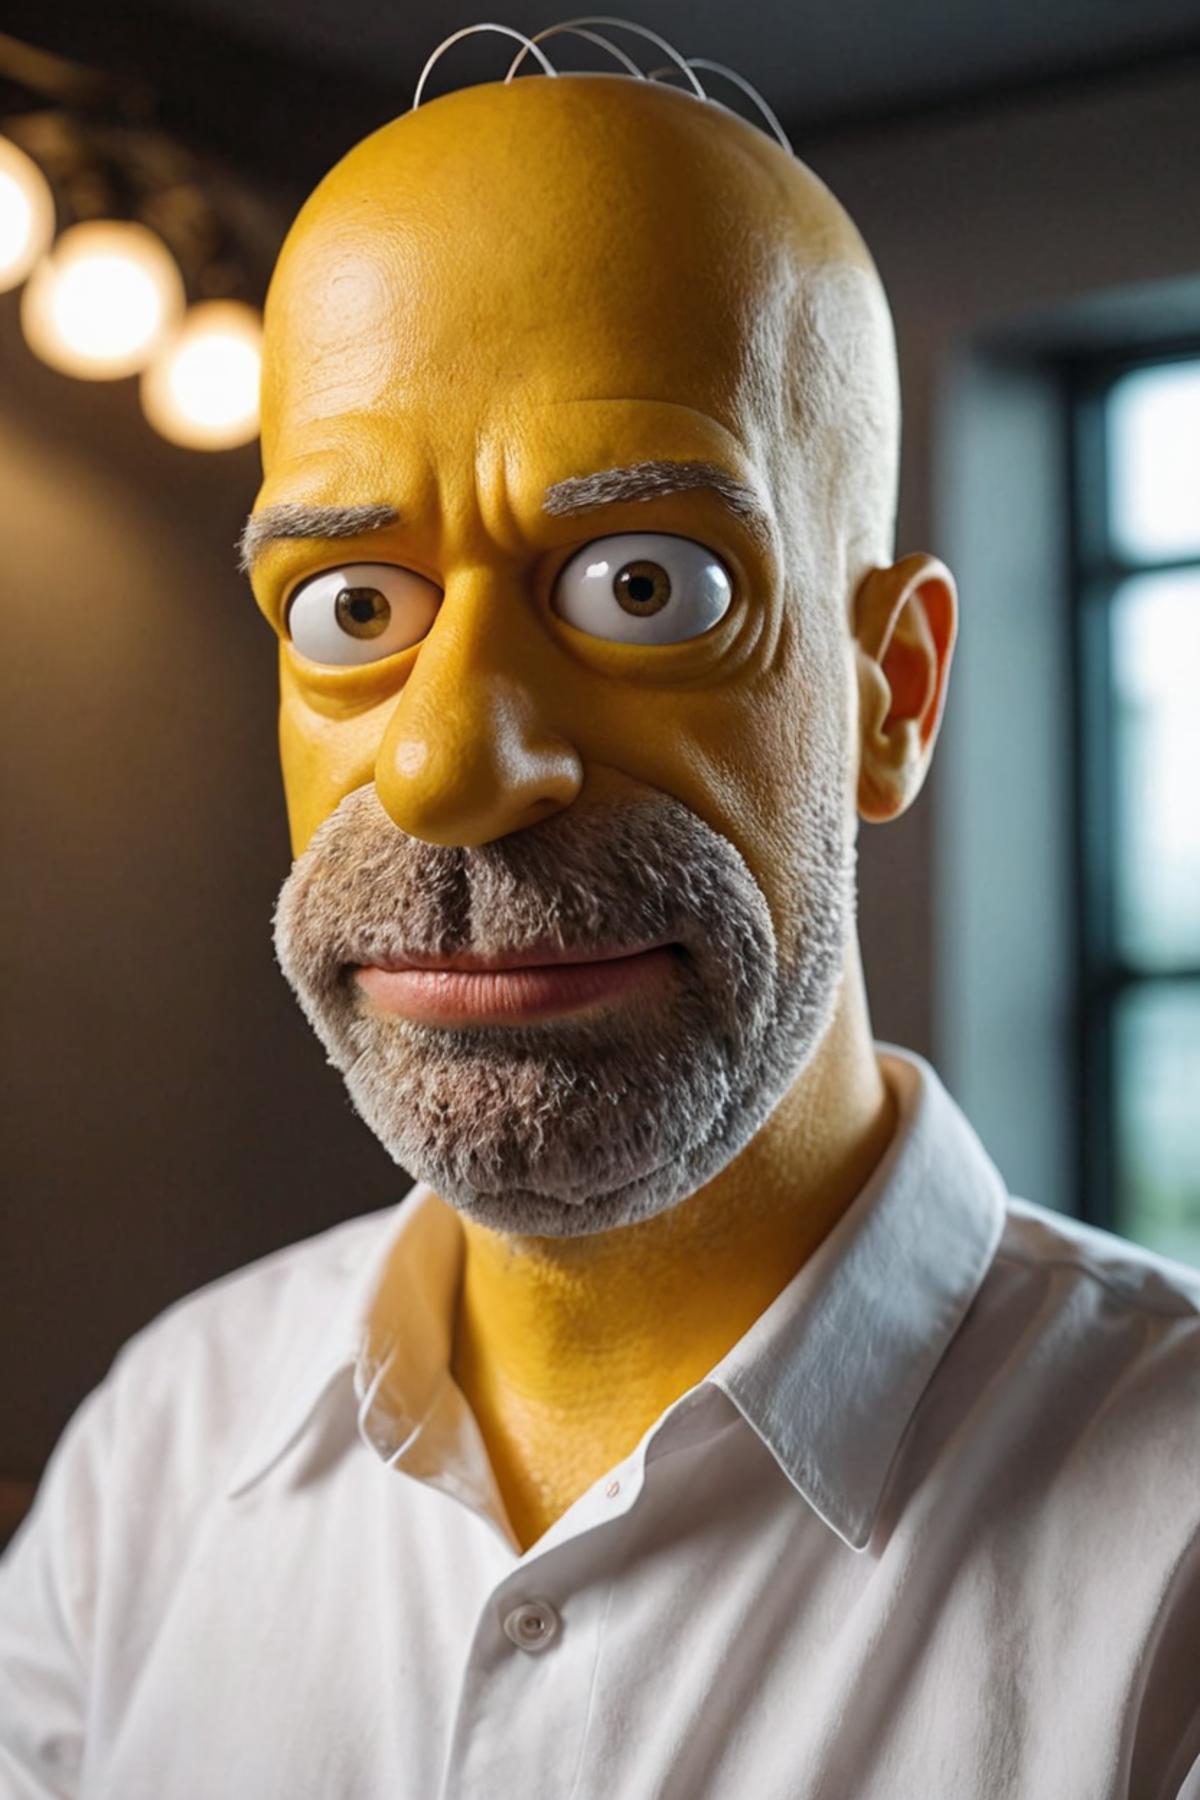 A man with a bald head and a yellow face.